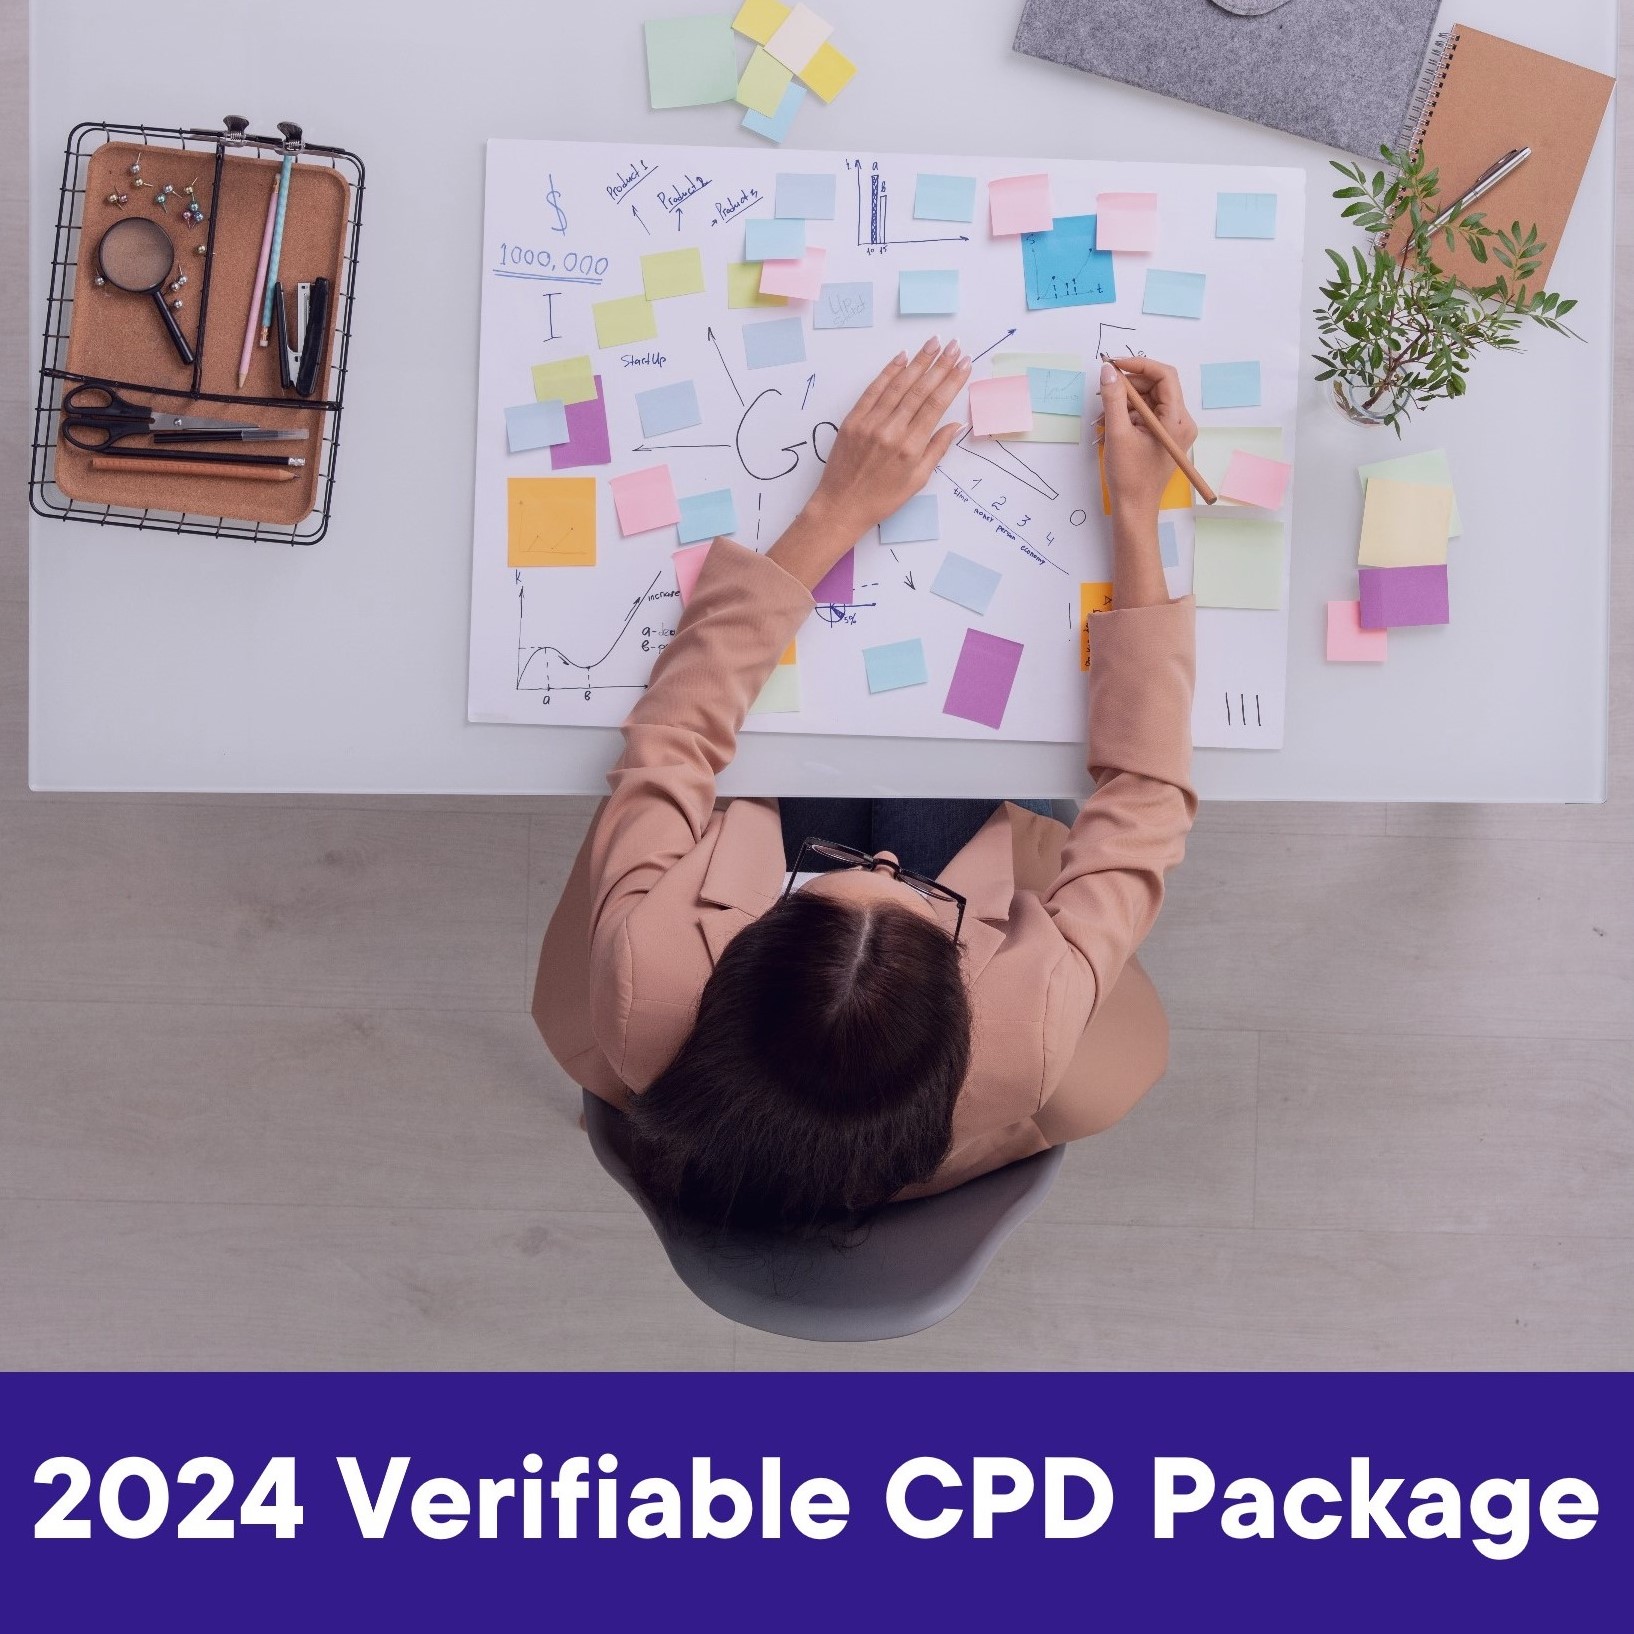 2024 Verifiable CPD Package 7 - Commercial and Industrial